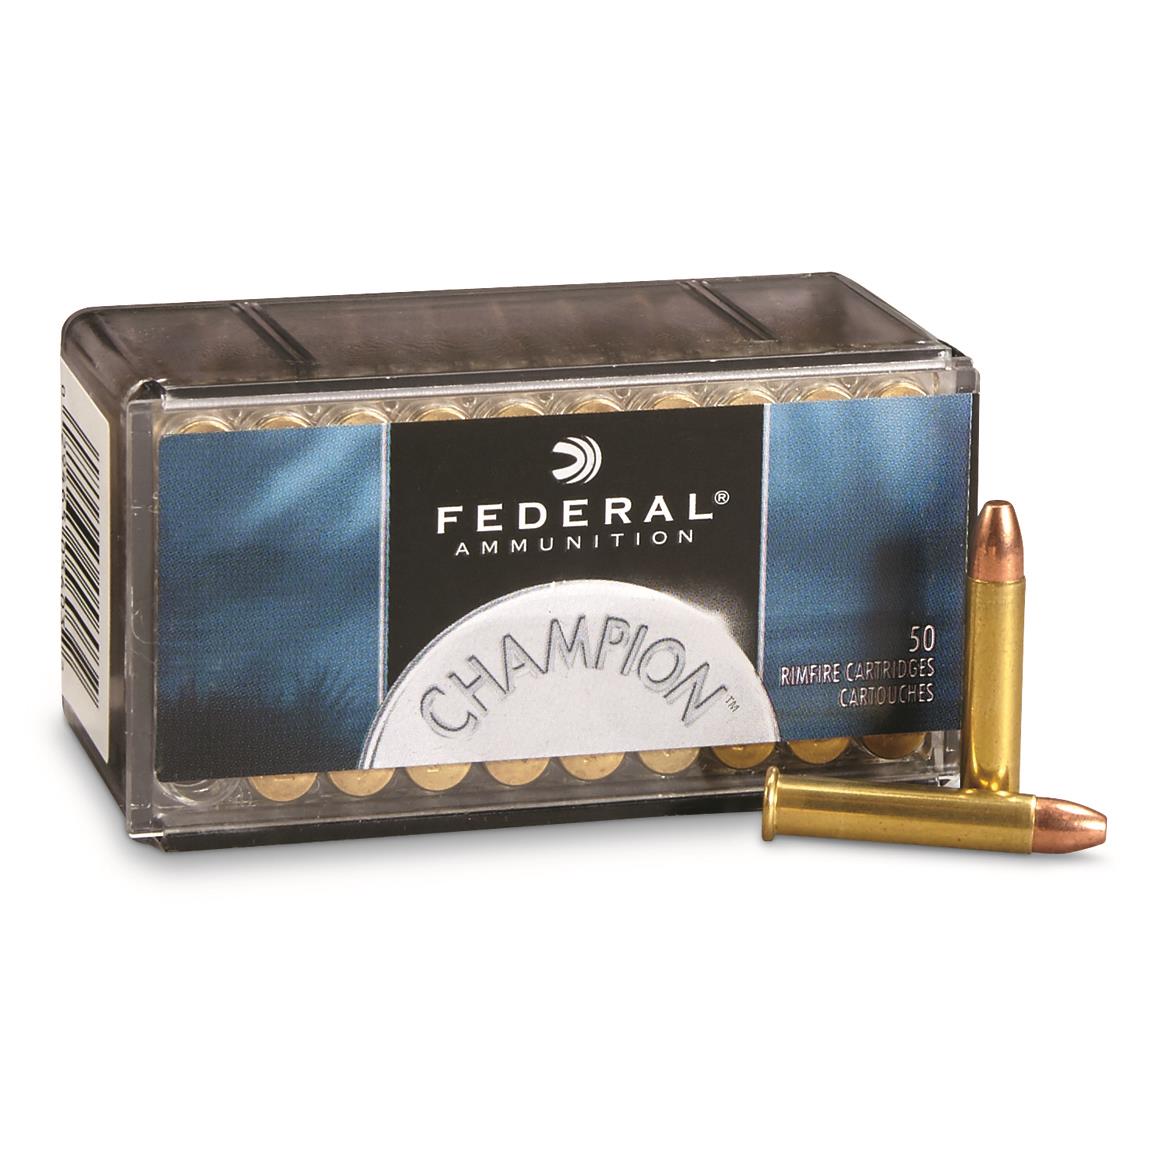 Federal, .22 Winchester Magnum, FMJ, 40 Grain, 50 Rounds